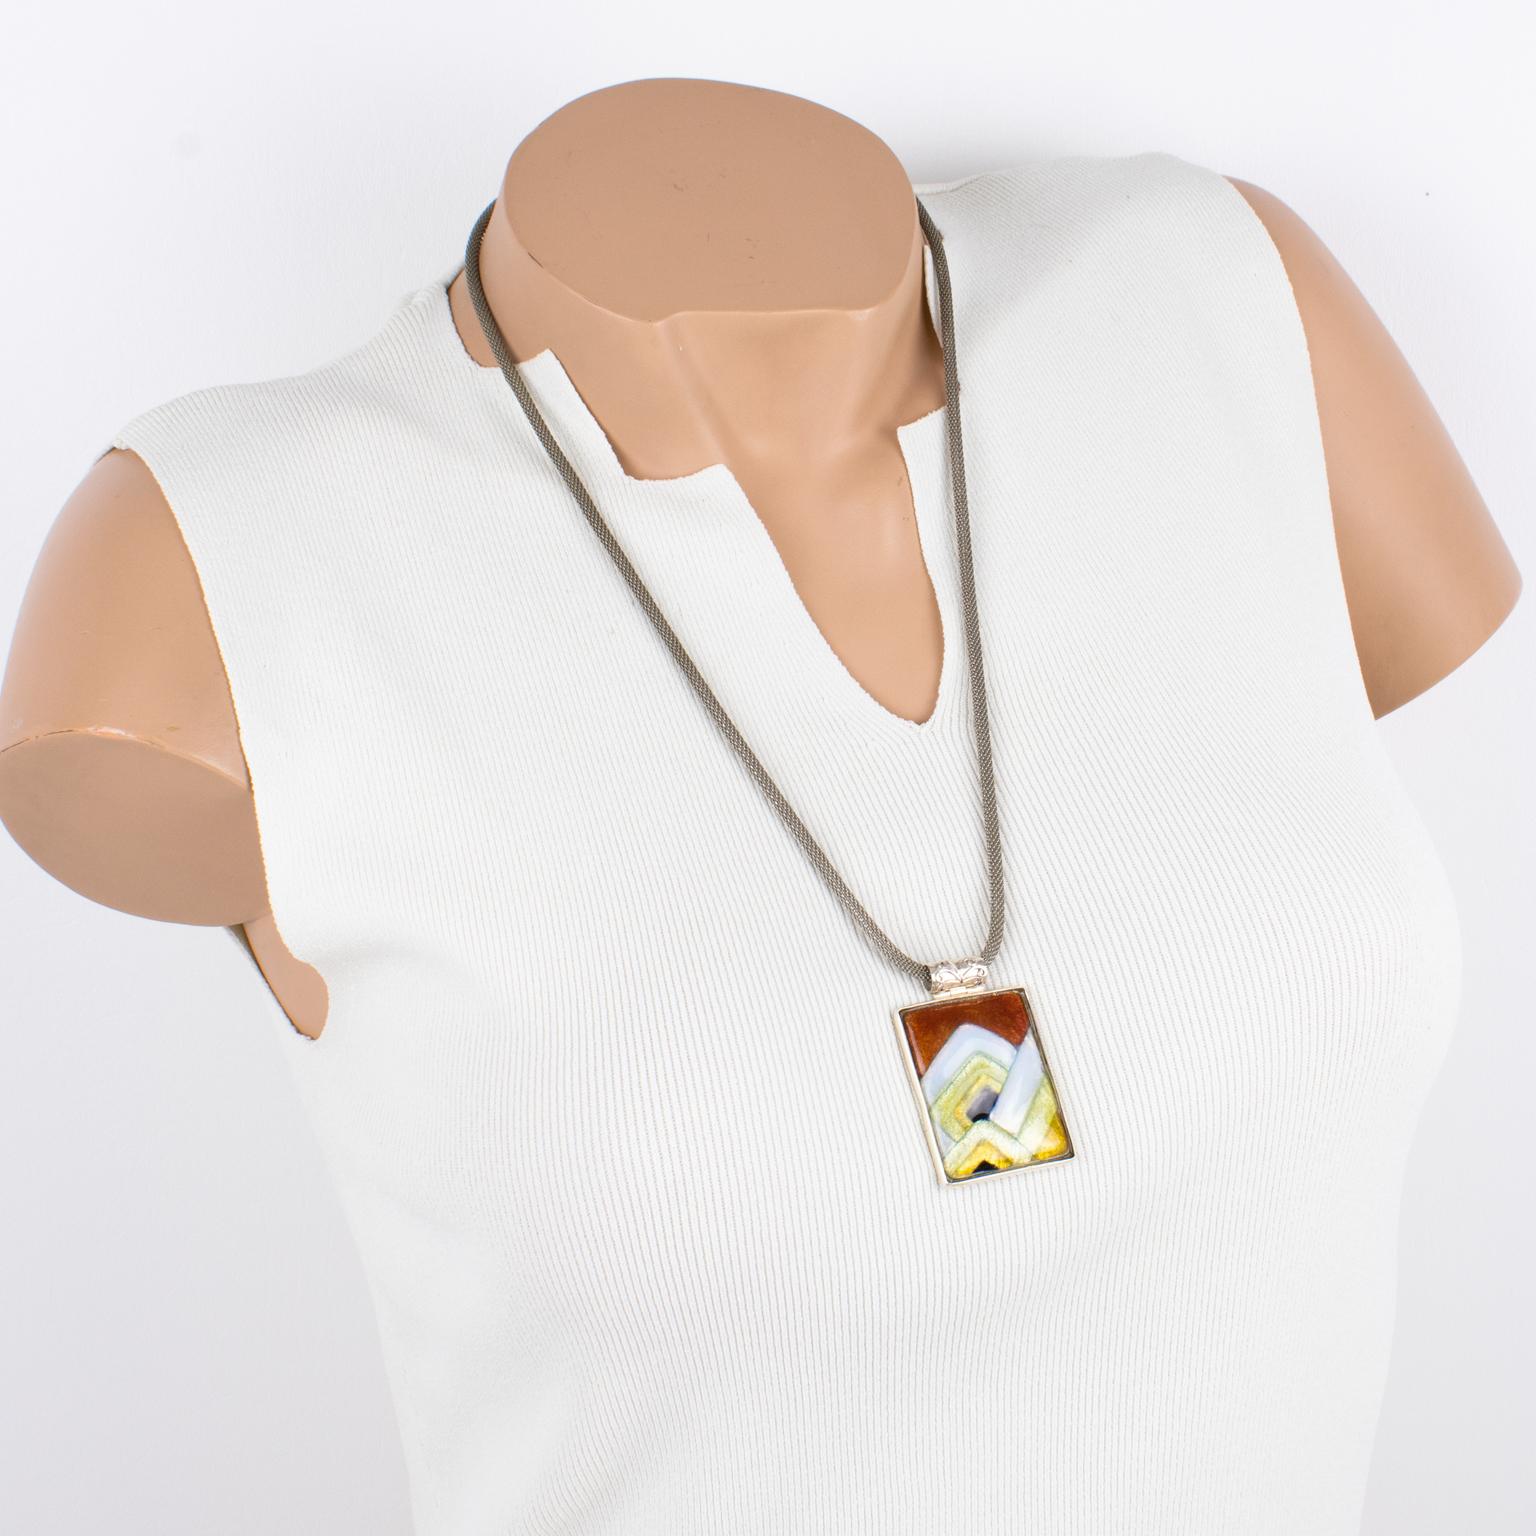 This elegant pendant necklace was hand-crafted by Limoges enamelist artist Mauricette Pinoteau. The rectangular silver plate frame is ornate with an enamel-on-copper cameo. The Art-Deco-inspired design has a geometric shape. The pendant boasts